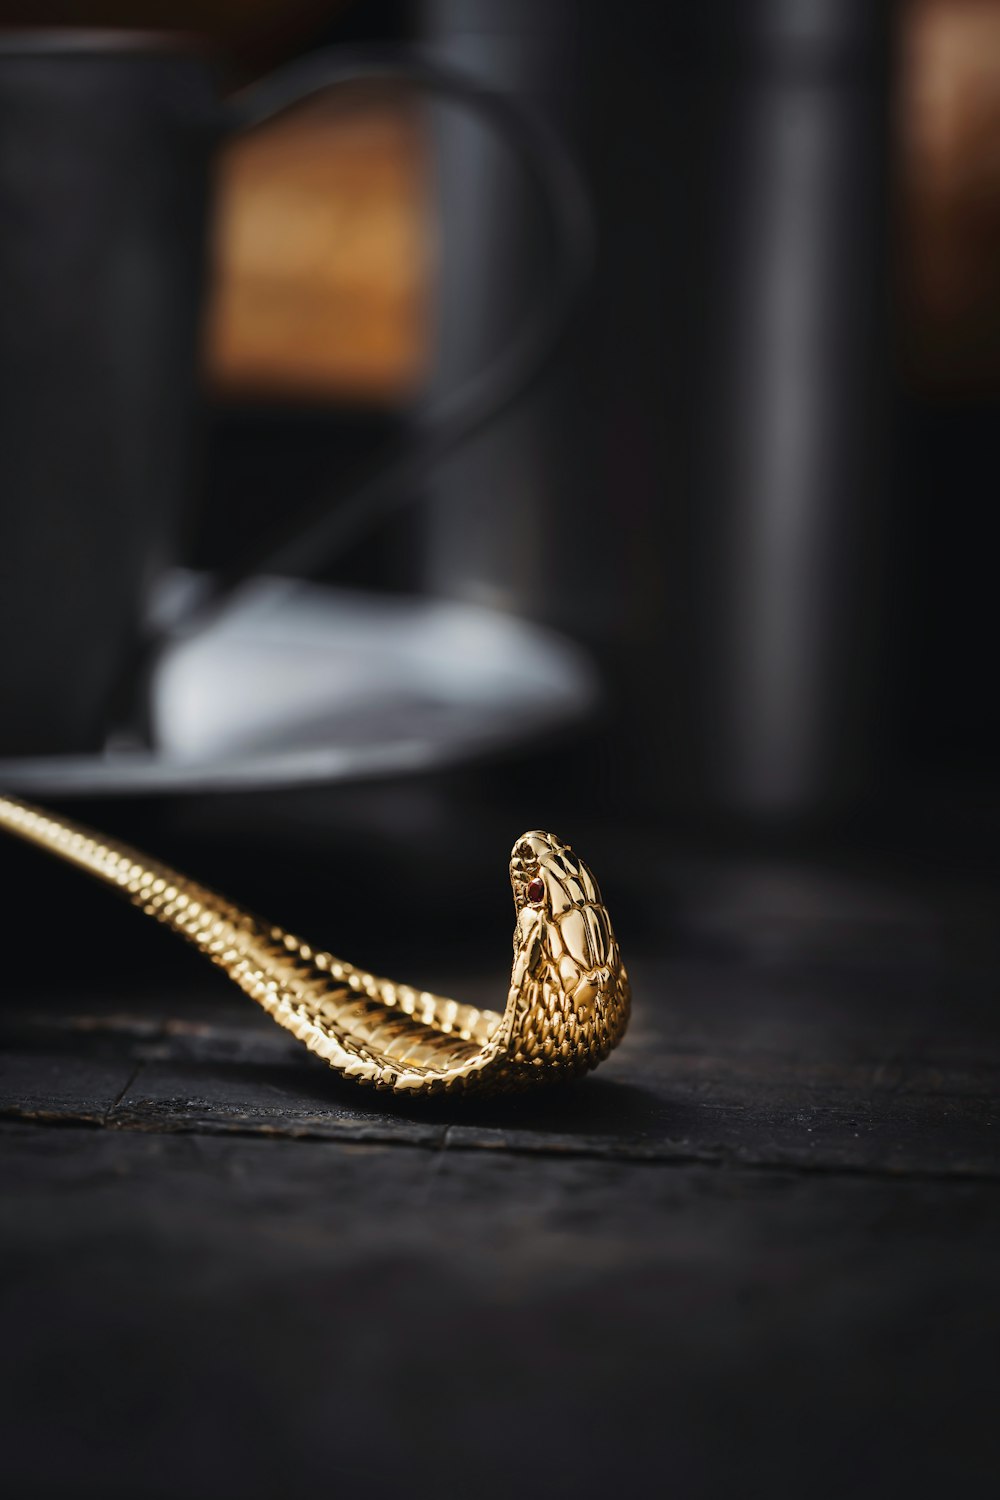 a golden snake on a table next to a coffee cup